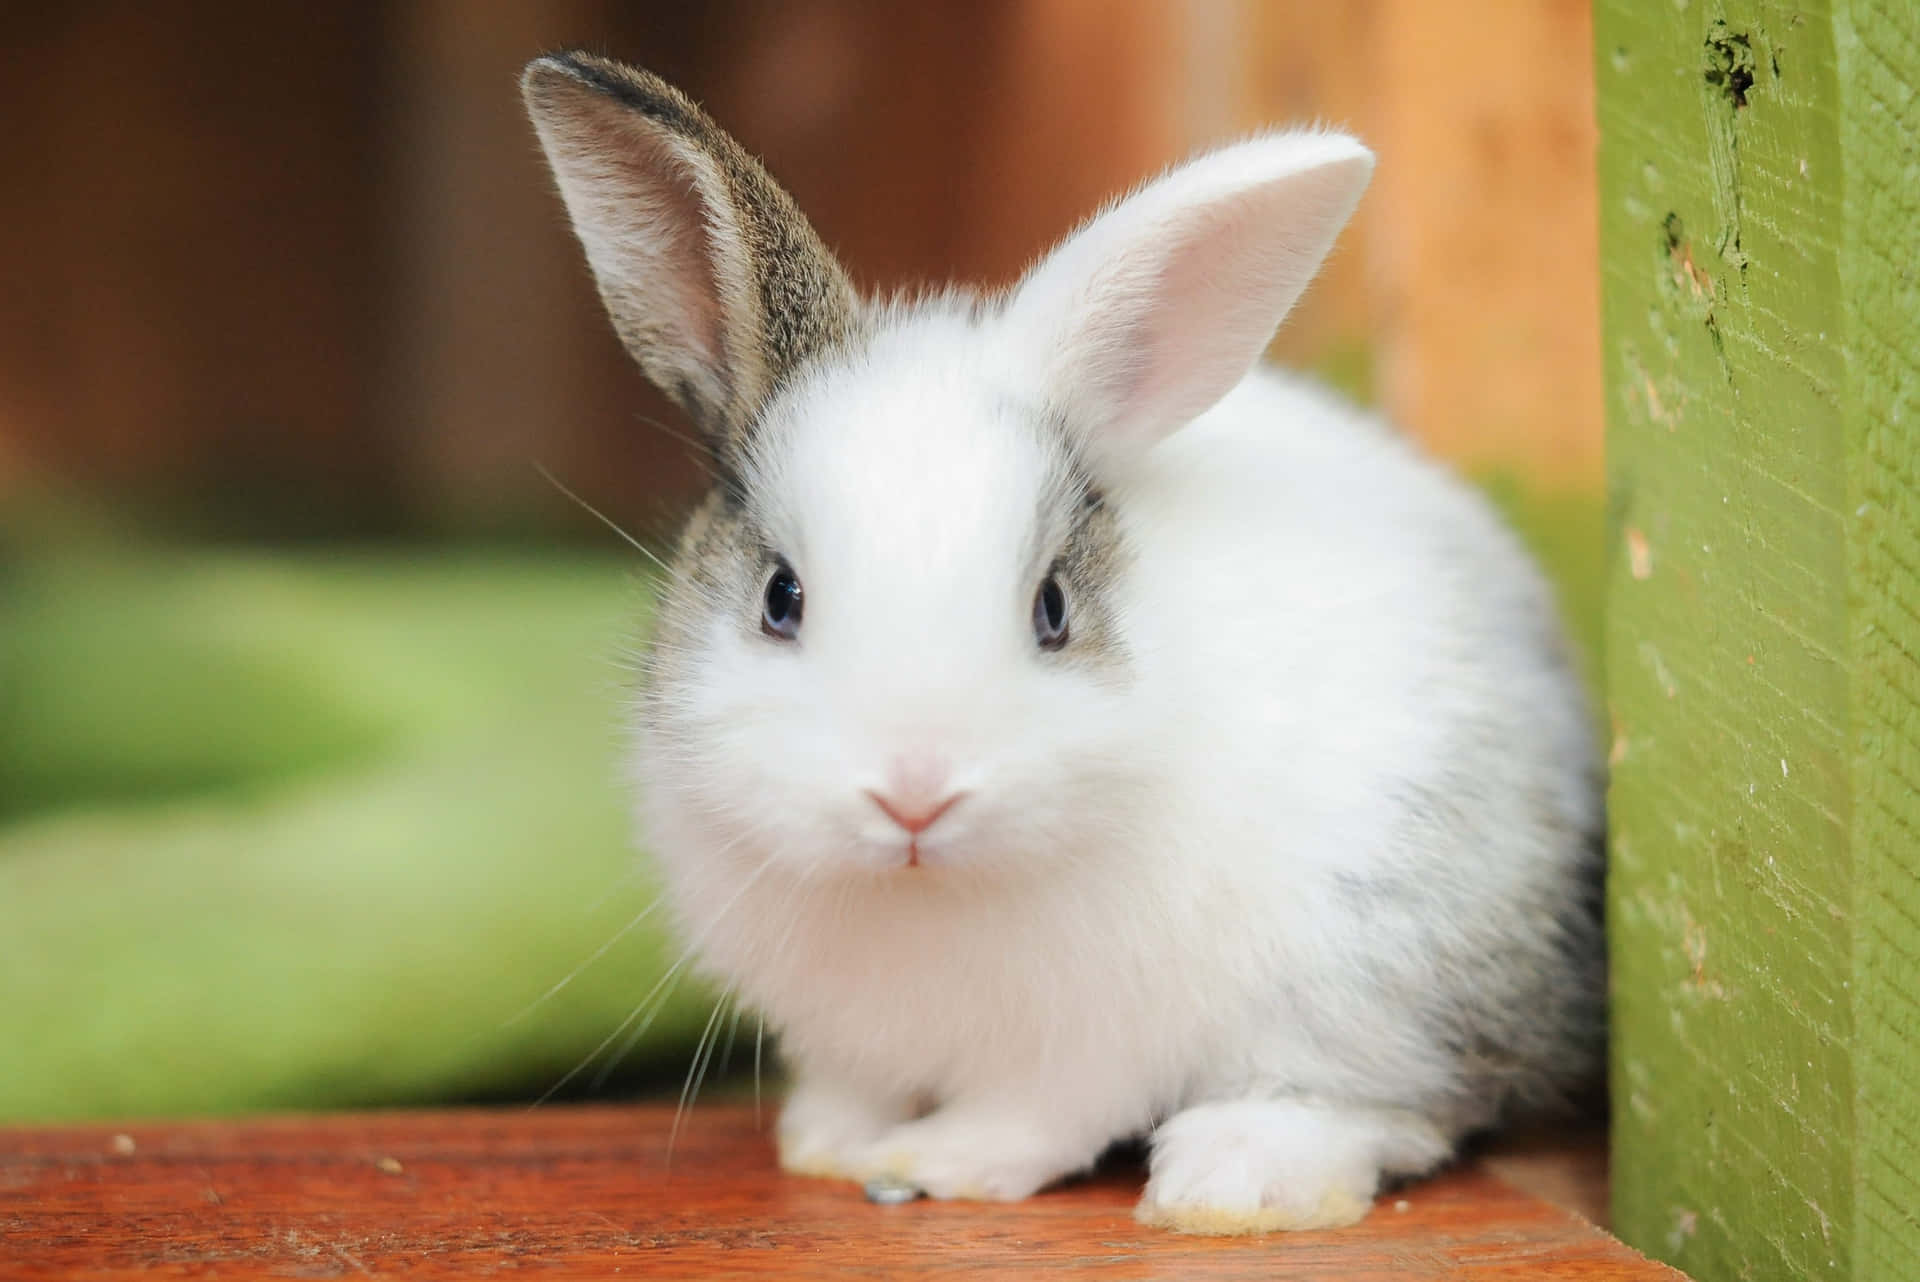 Cute Bunny At Home Picture